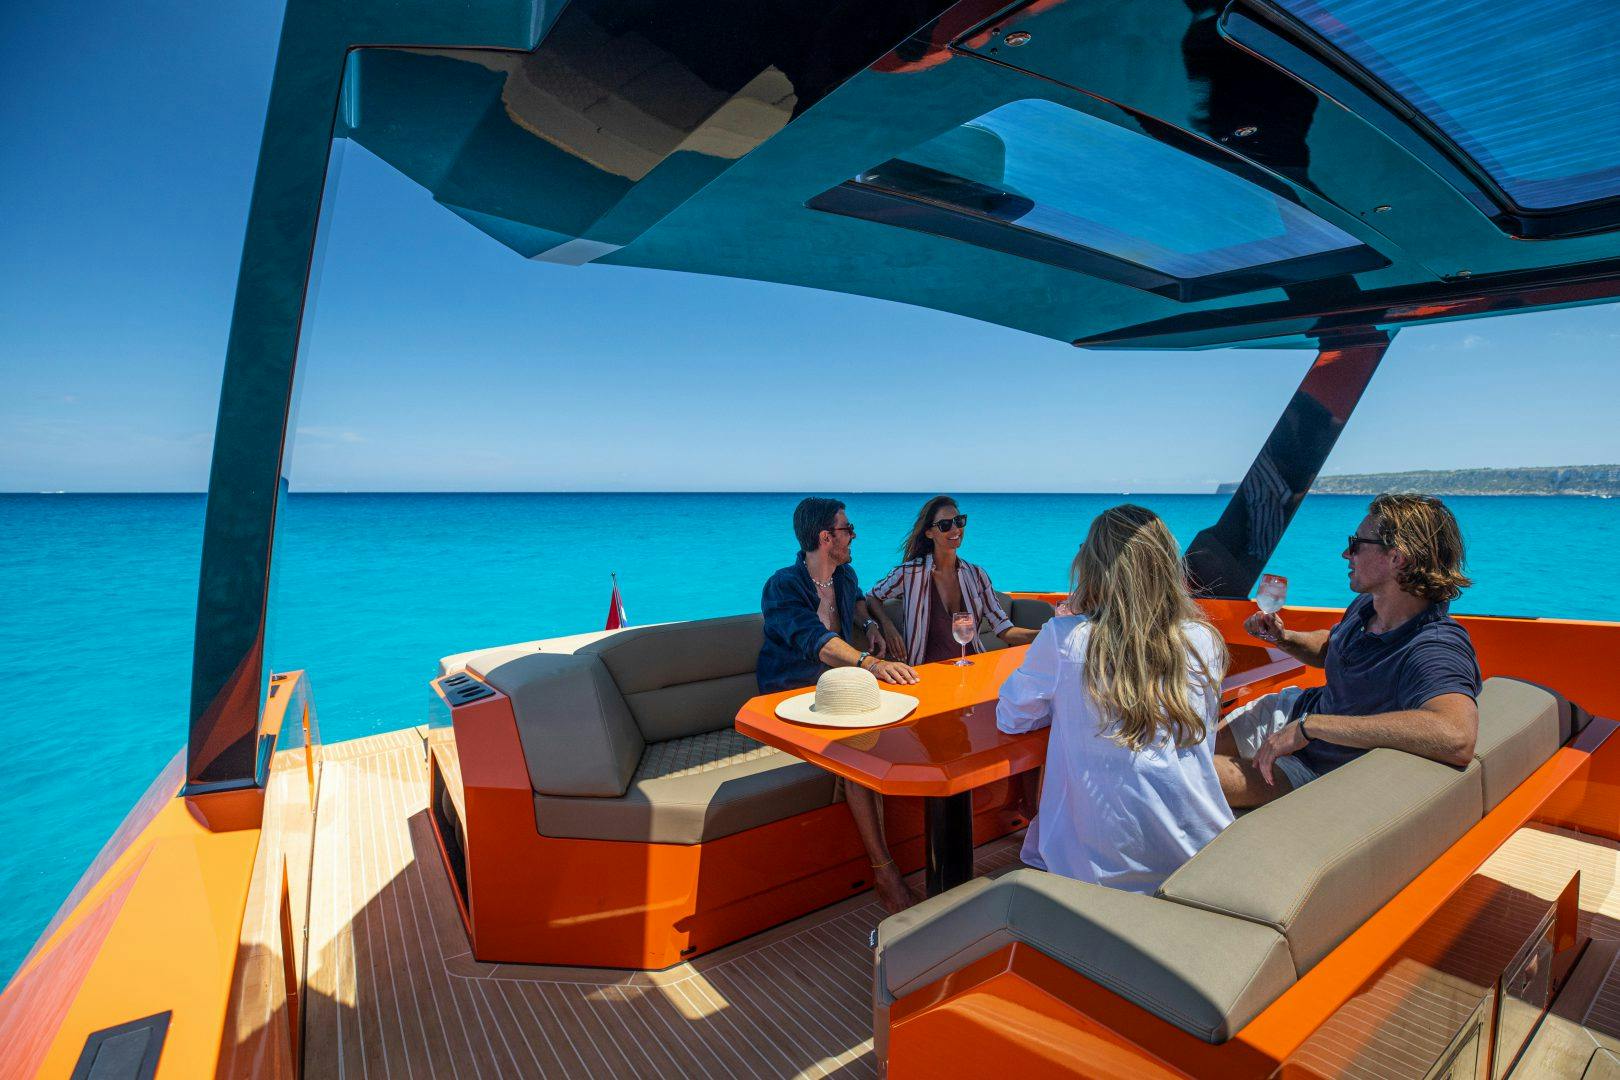 vanquish VQ52 coco loco deck view with people talking around the table